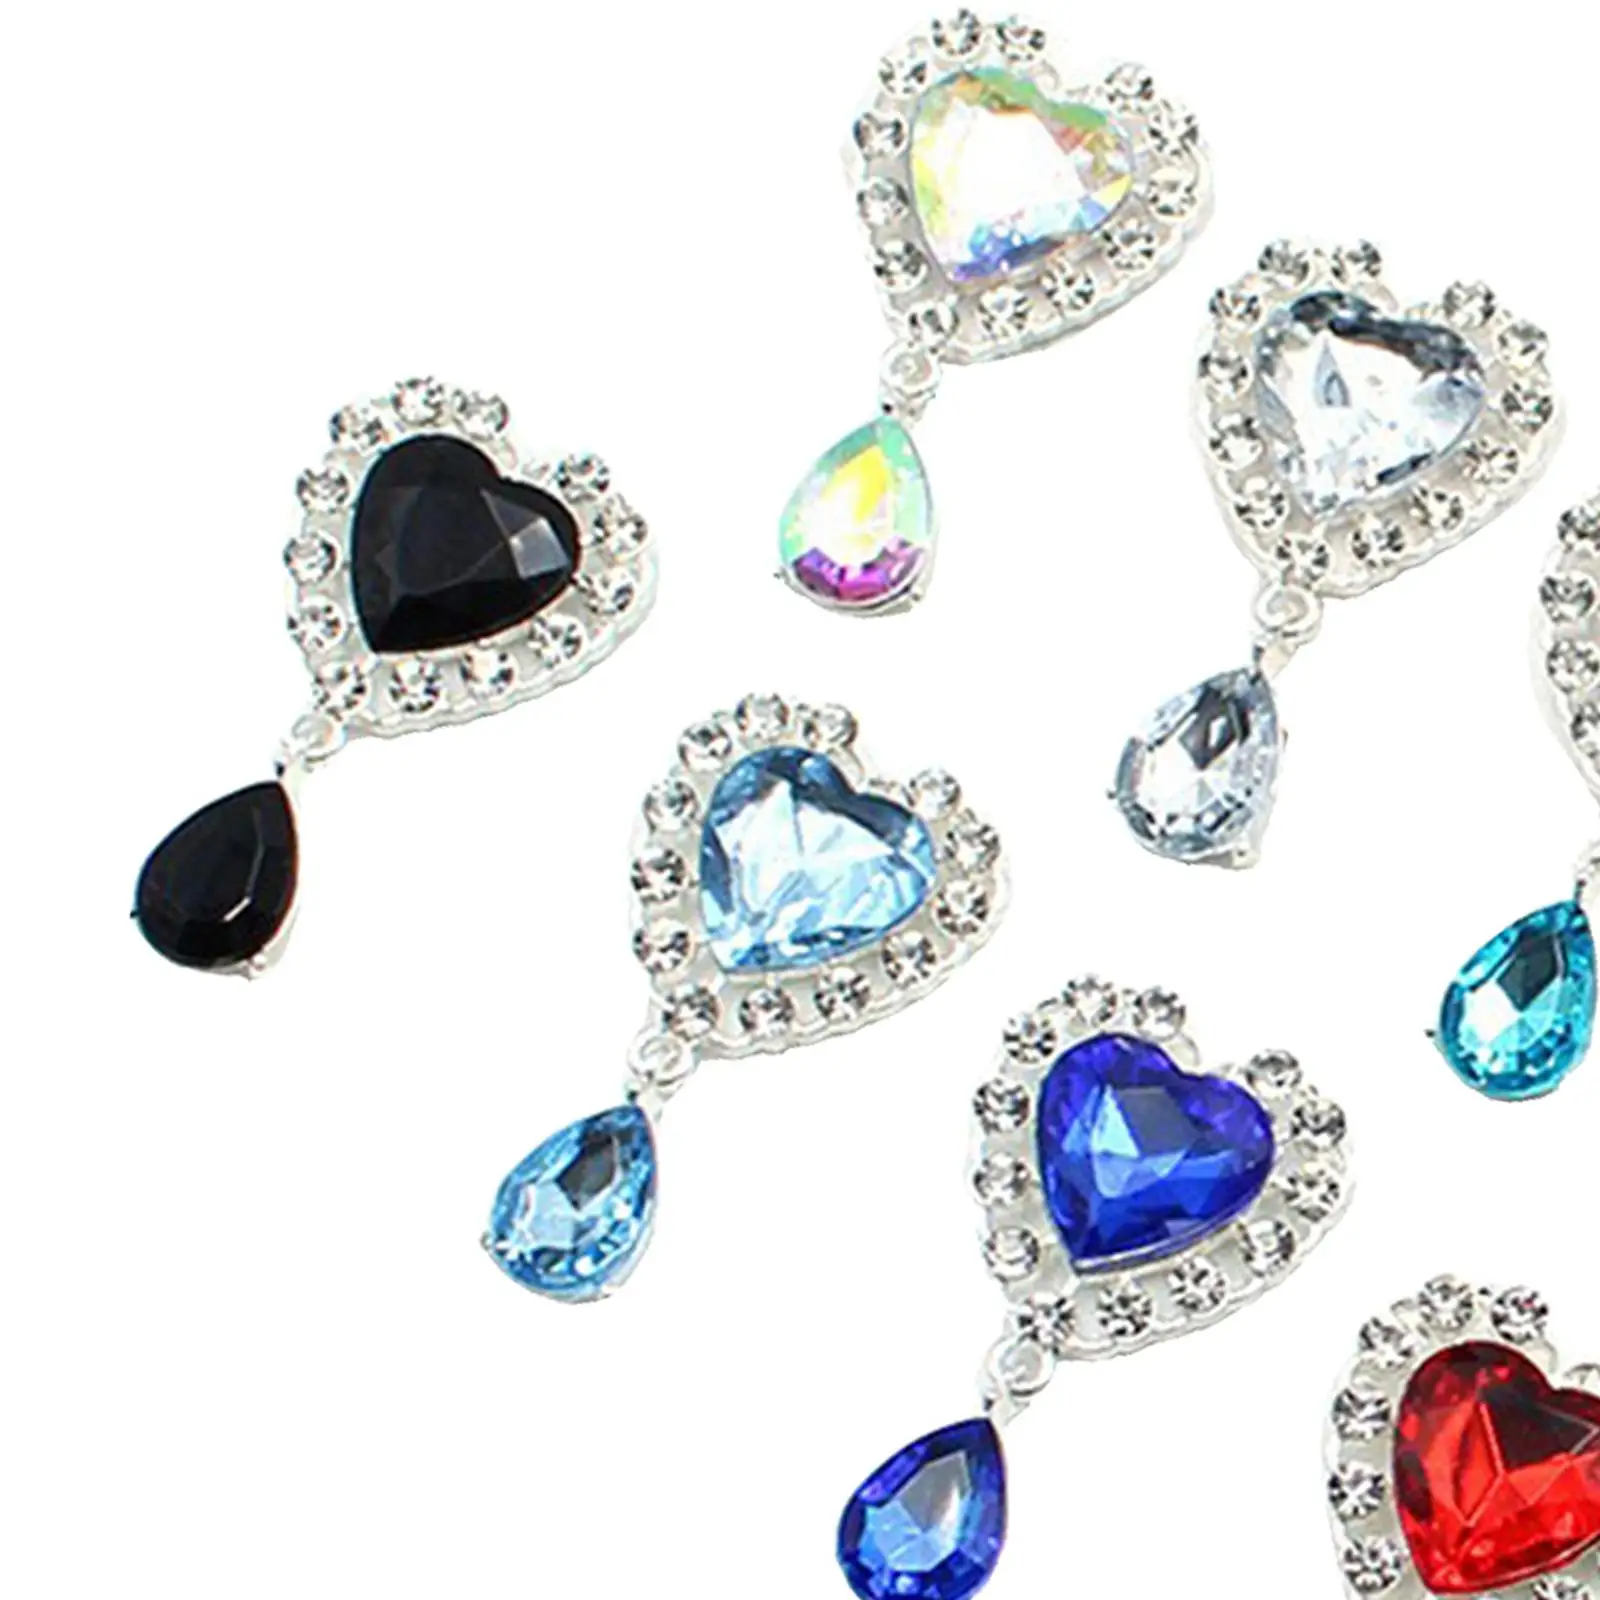 10Pcs Heart Rhinestone Buttons 45mmx25mm Mixed Color Rhinestone Charms Pendant for Diy Clothes Headband Dress Jewelry Making